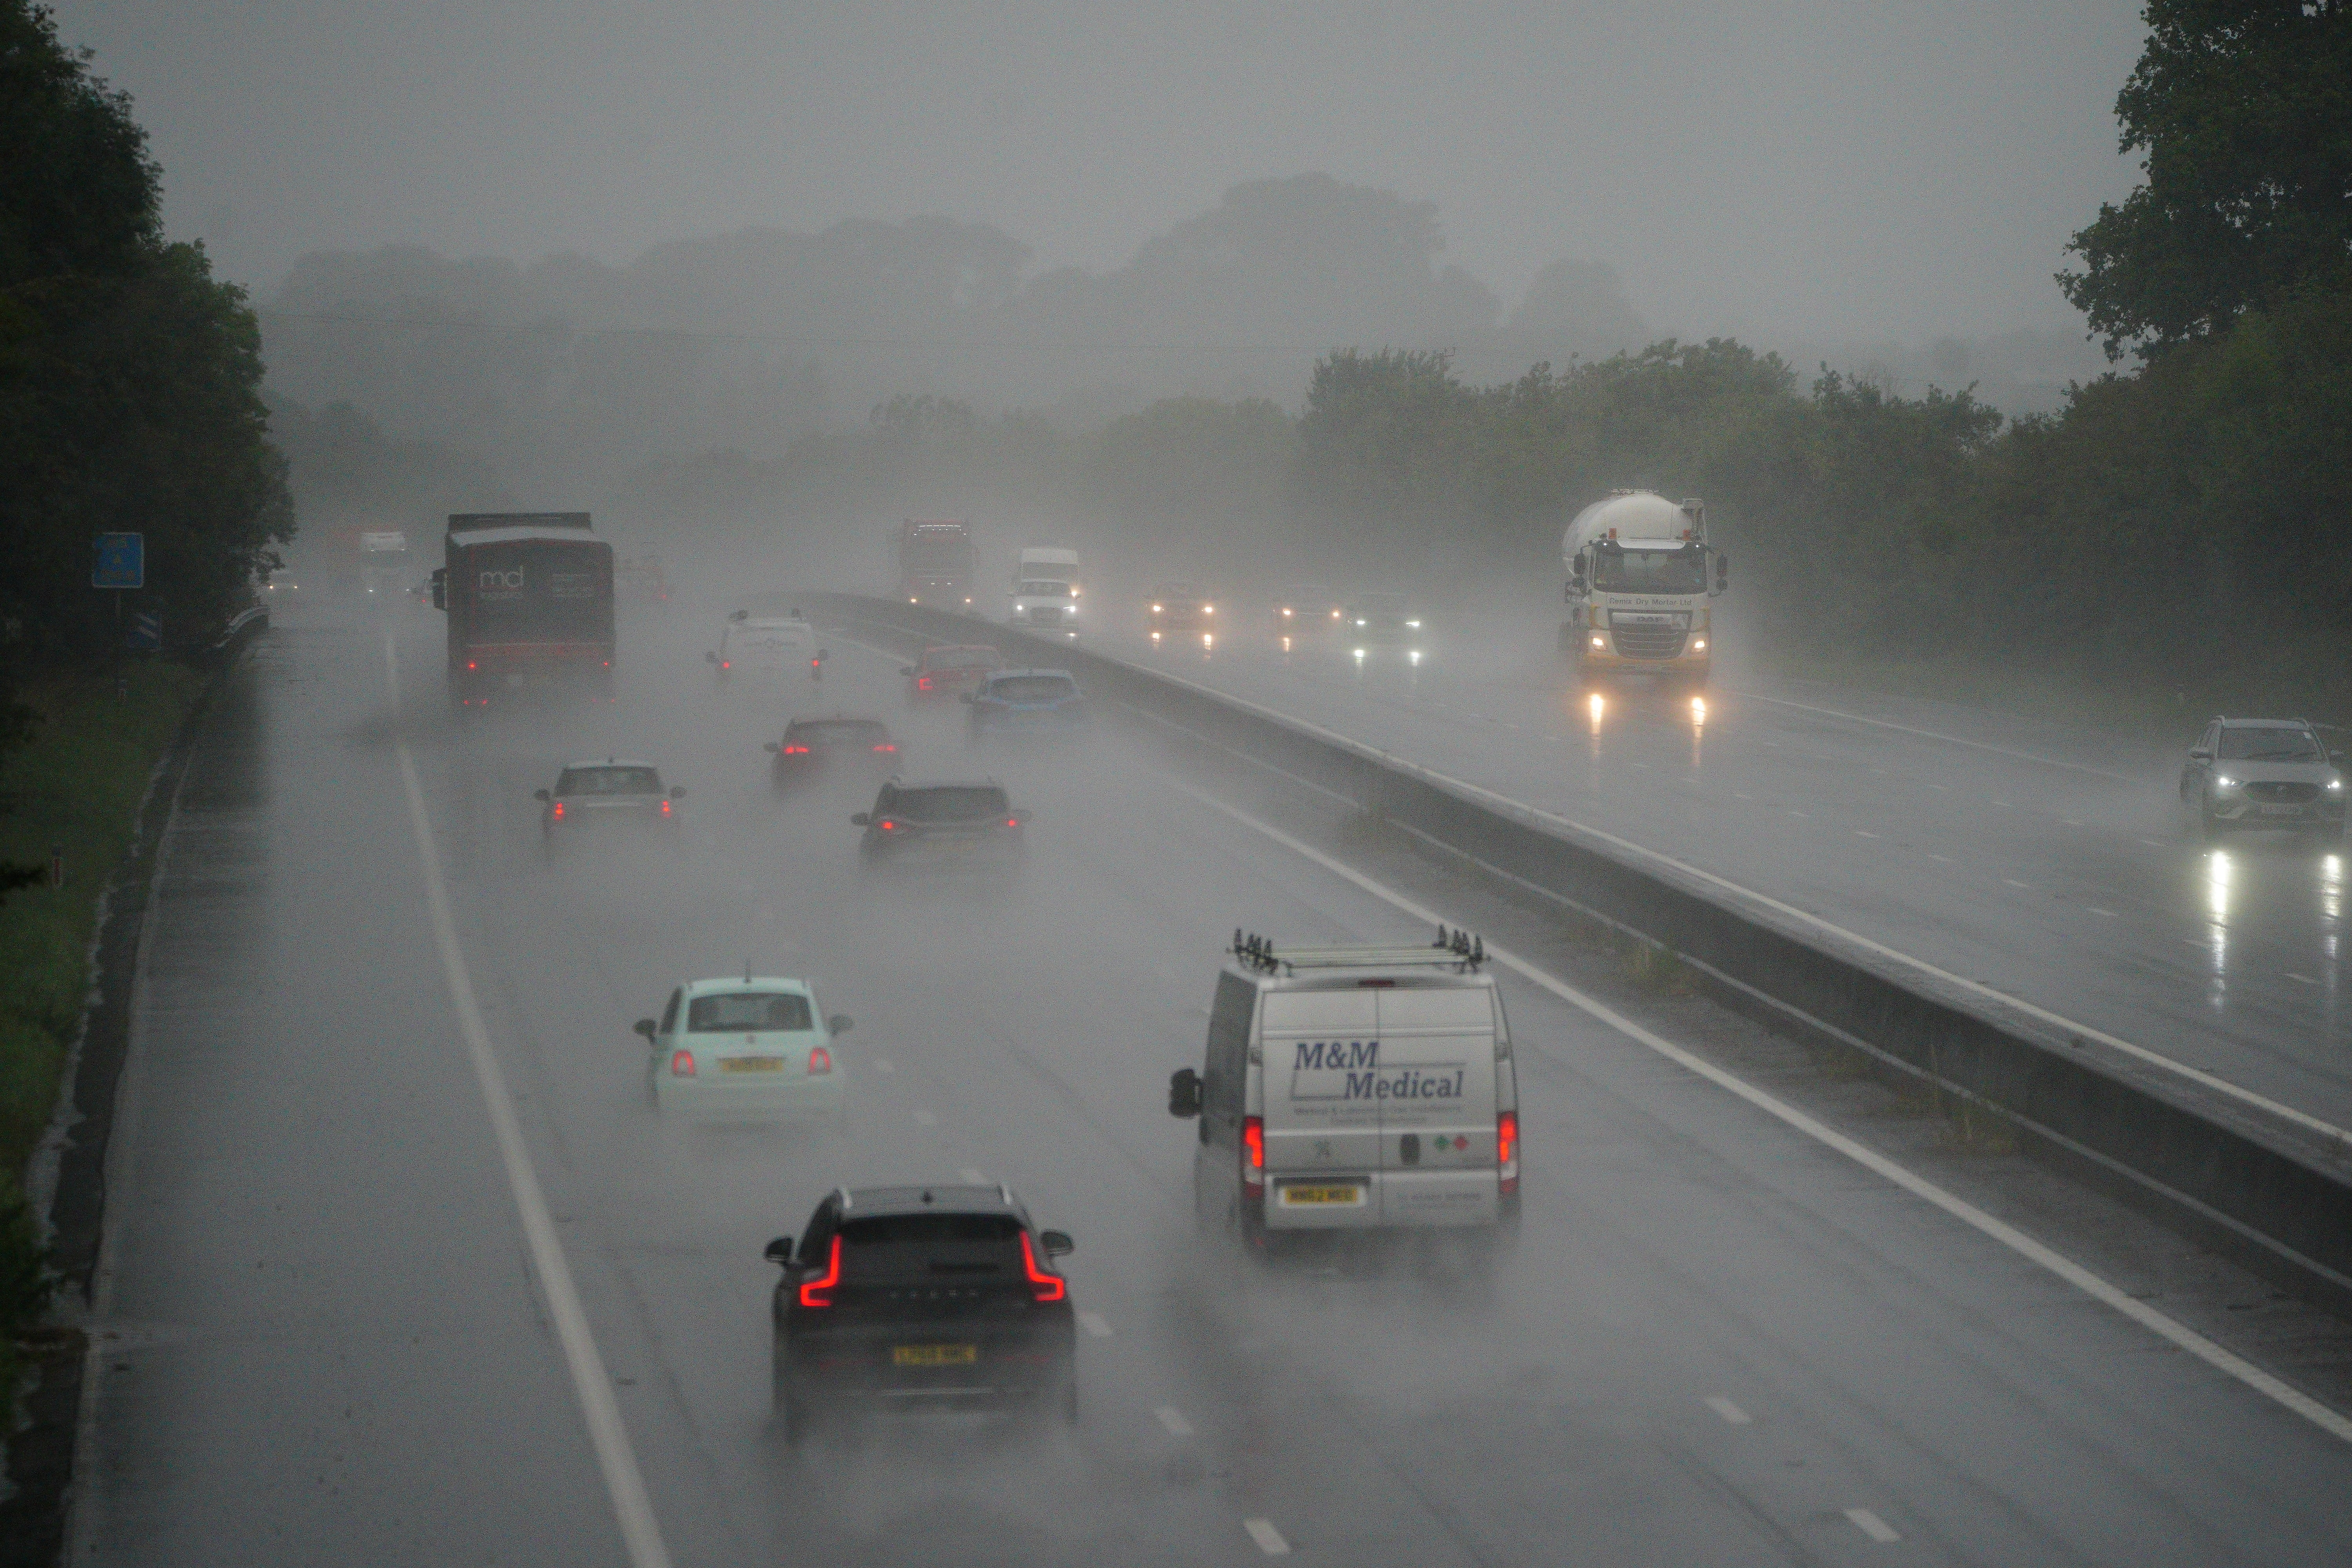 Drivers tackled tricky conditions on the M5 motorway near Taunton, Somerset